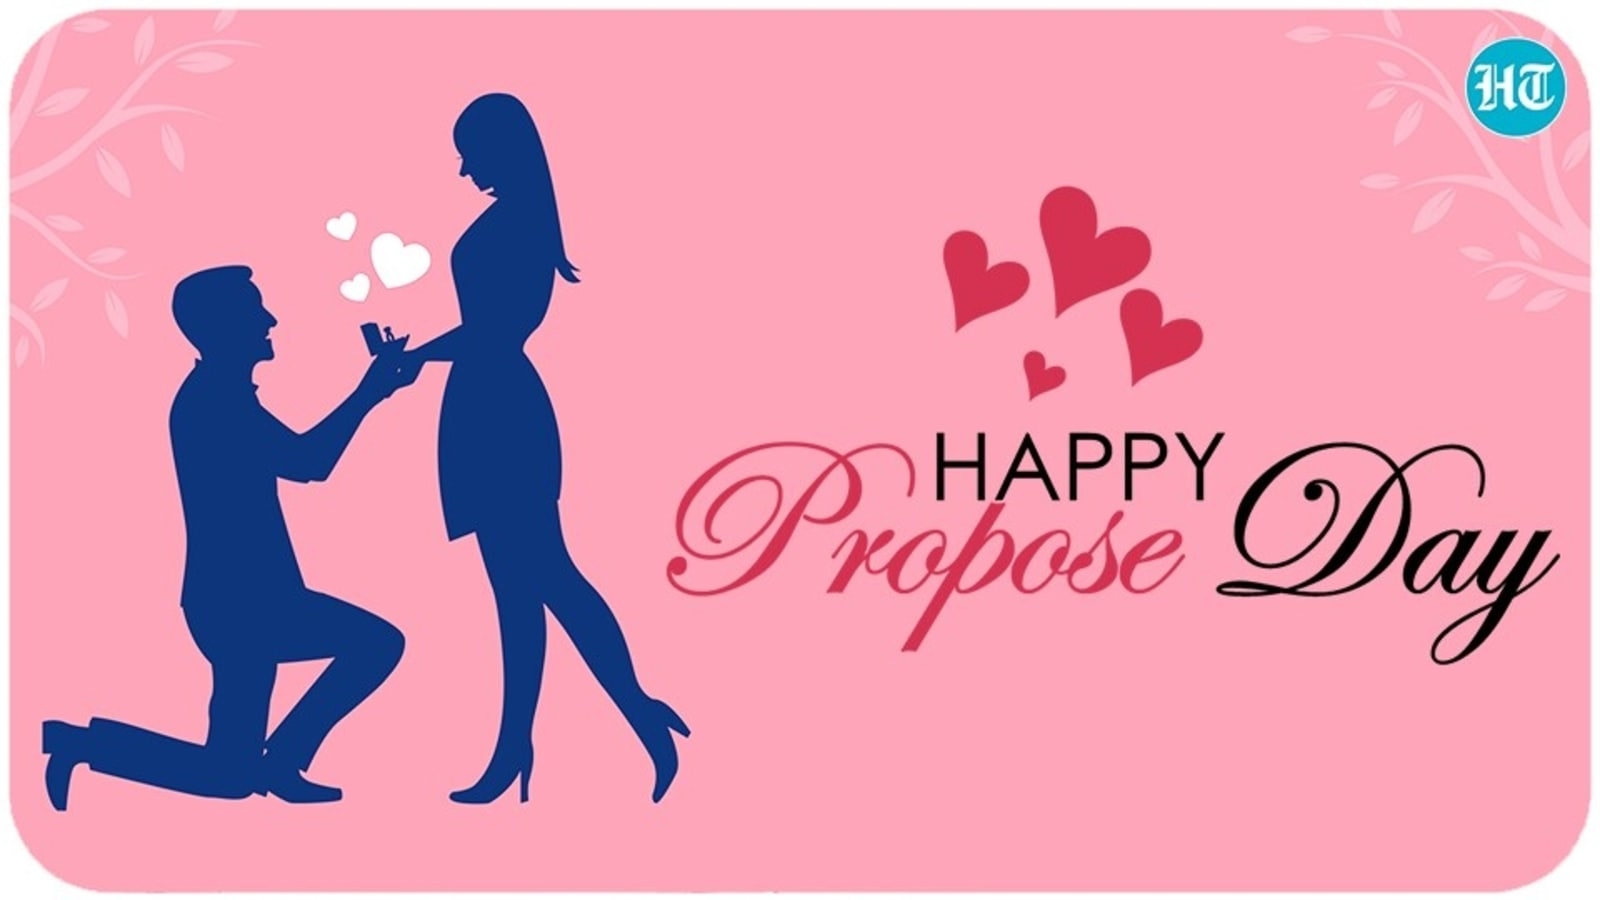 Happy Propose Day: Best wishes, images, messages to send your ...